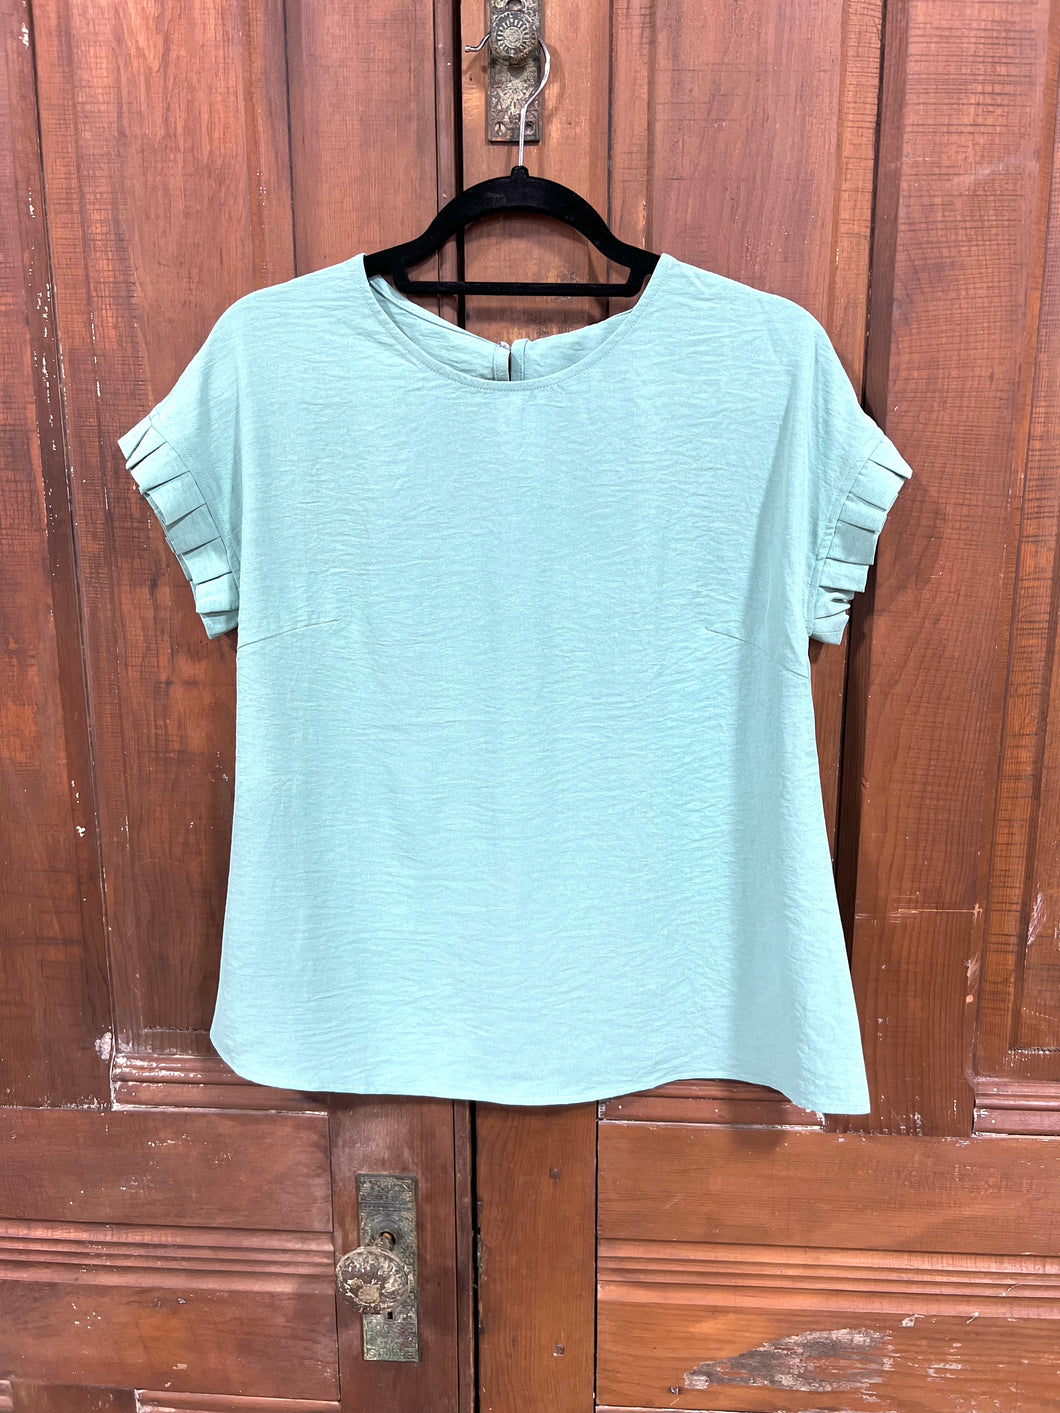 Mint pleated top